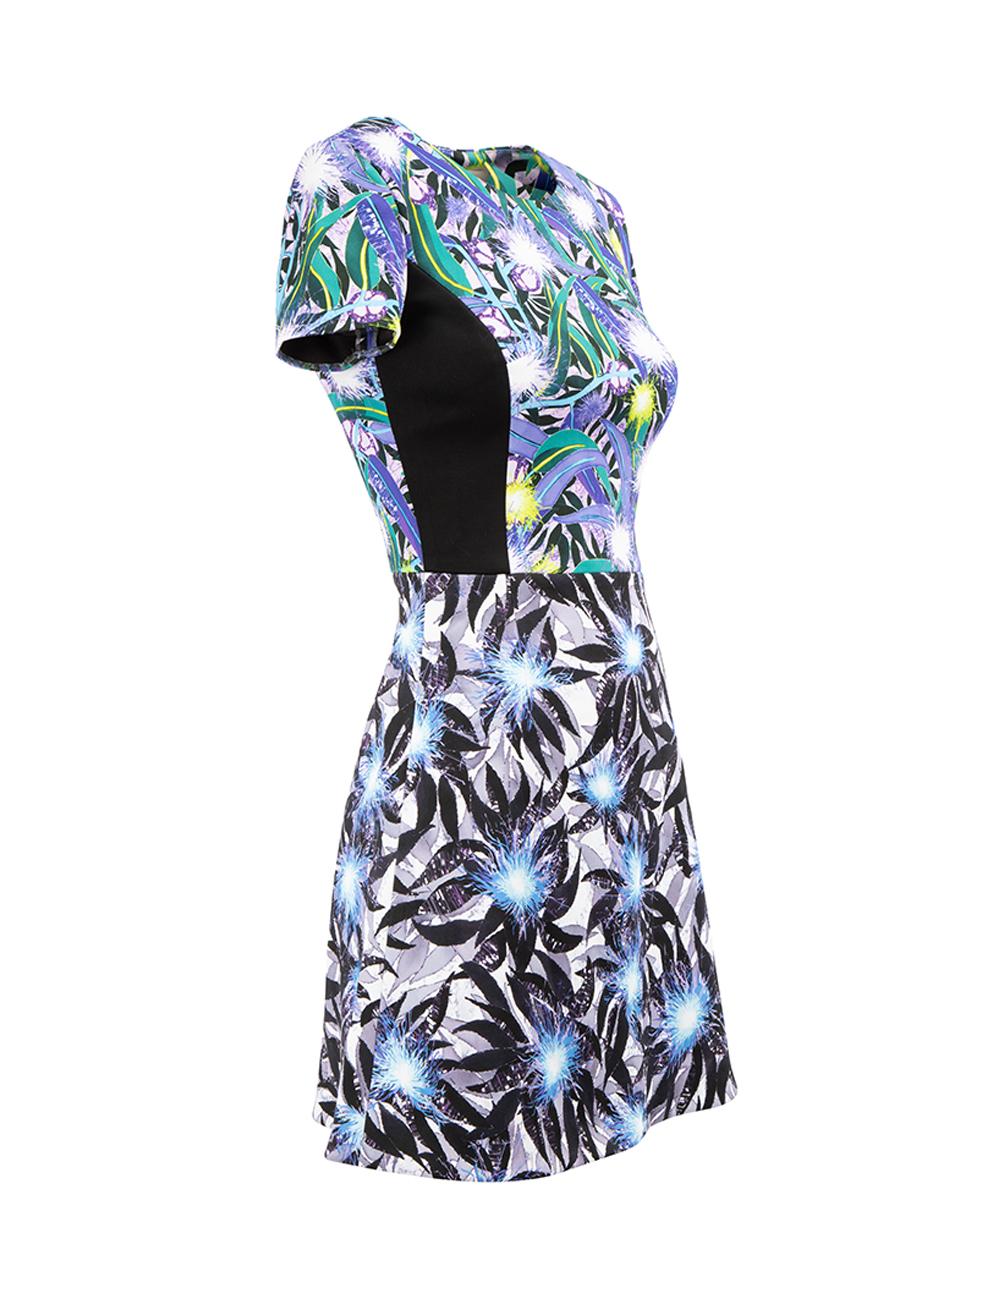 CONDITION is Very good. Minimal wear to dress is evident. Minimal wear to the interior lining near the hem of the dress where a stain can be seen on this used Peter Pilotto designer resale item. 



Details


Multicolour

Polyester

Mini